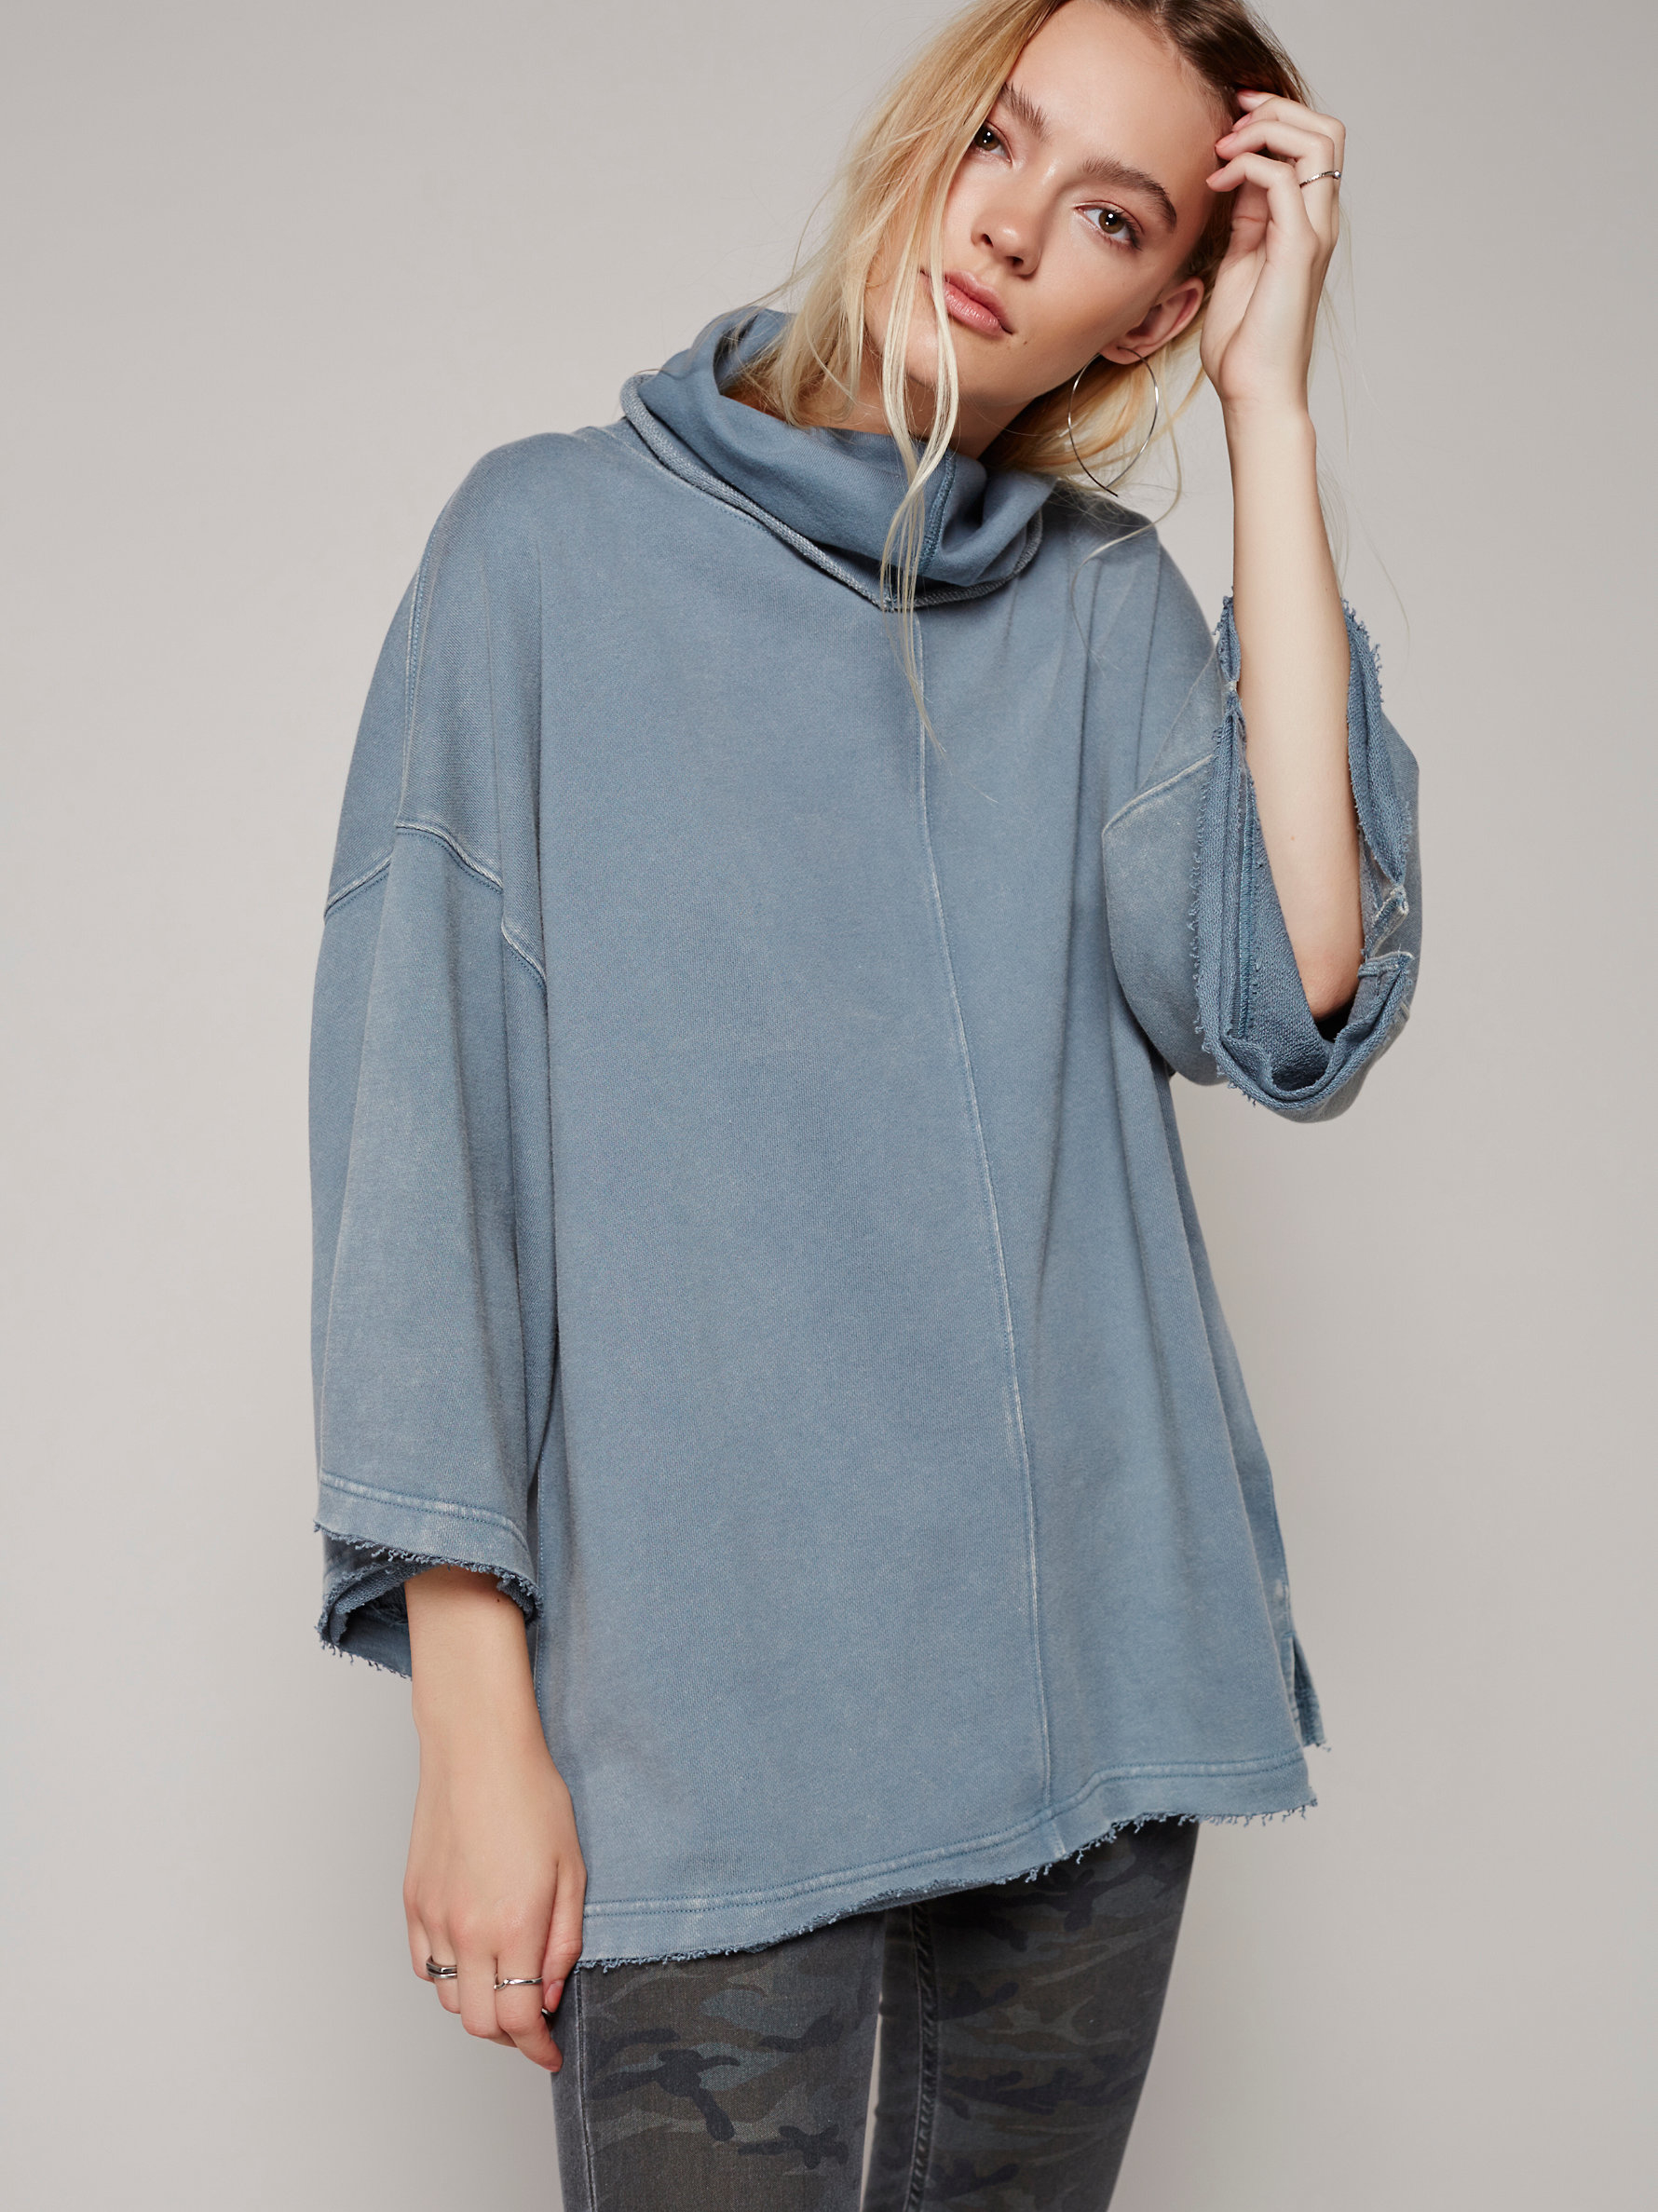 Lyst - Free People Marley Girl Tunic in Blue